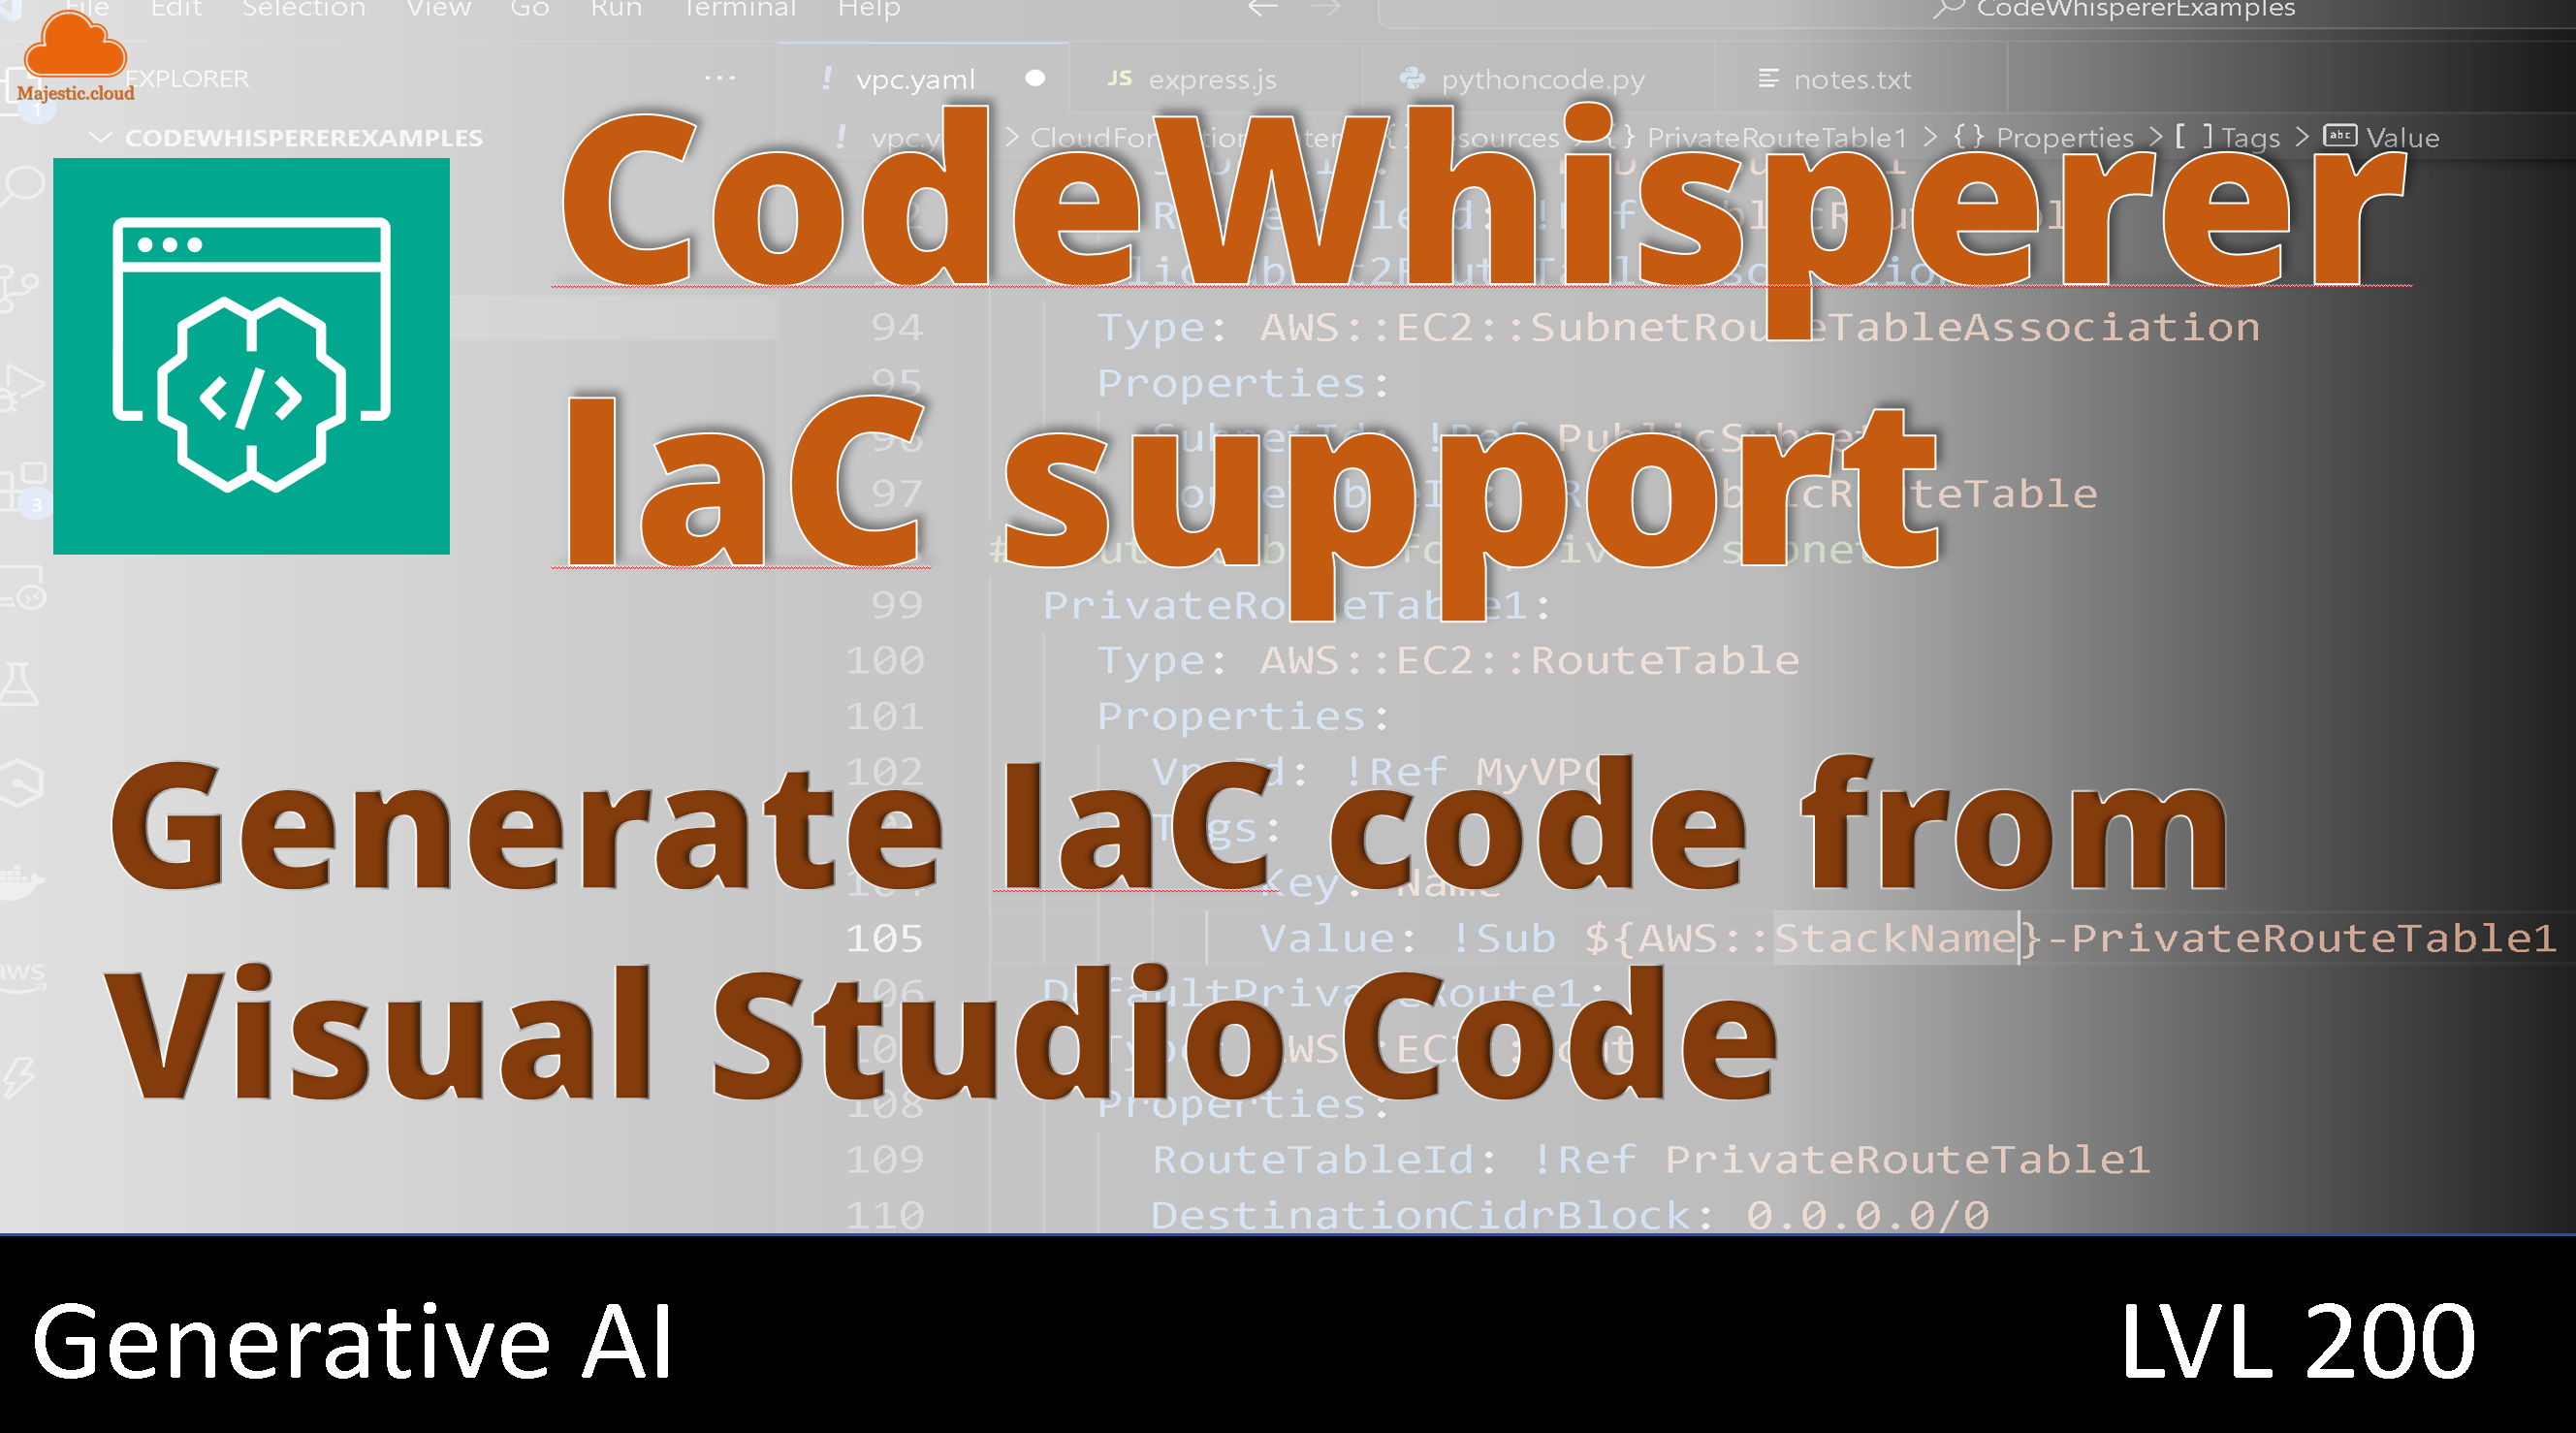 Use CodeWhisperer to automatically generate IaC code from Visual Studio Code